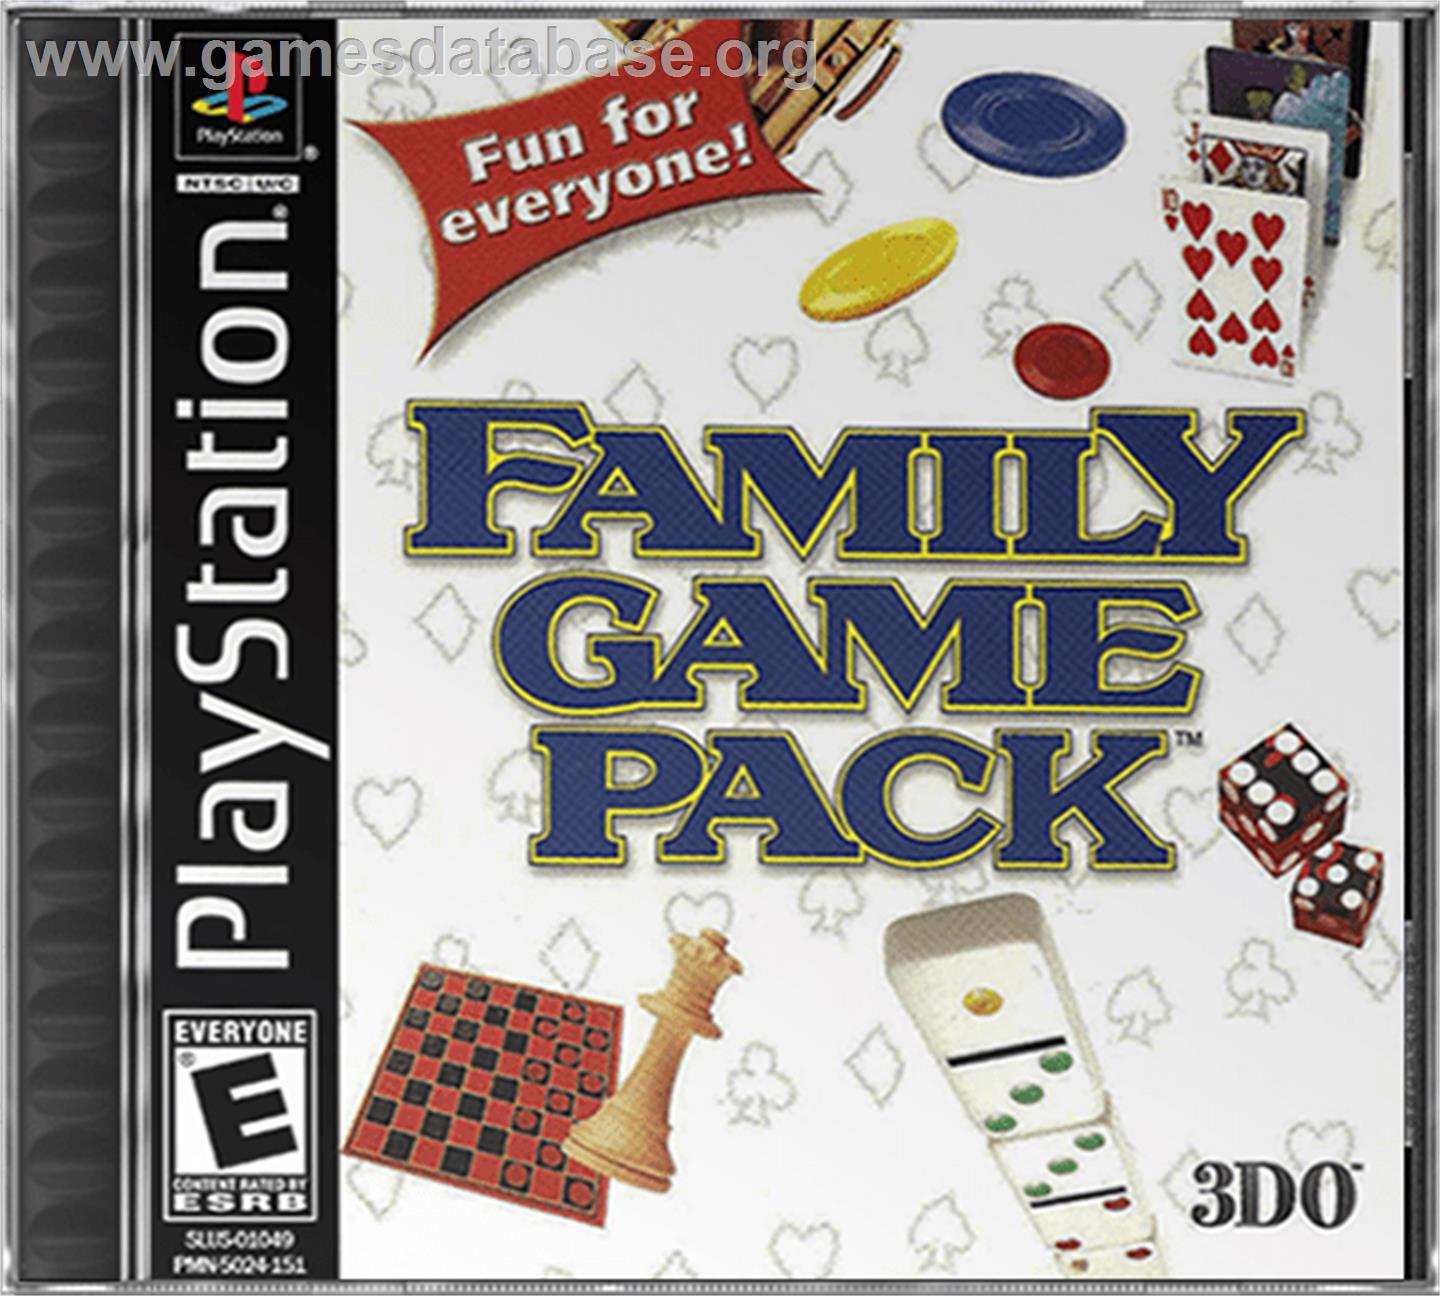 Family Game Pack - Sony Playstation - Artwork - Box